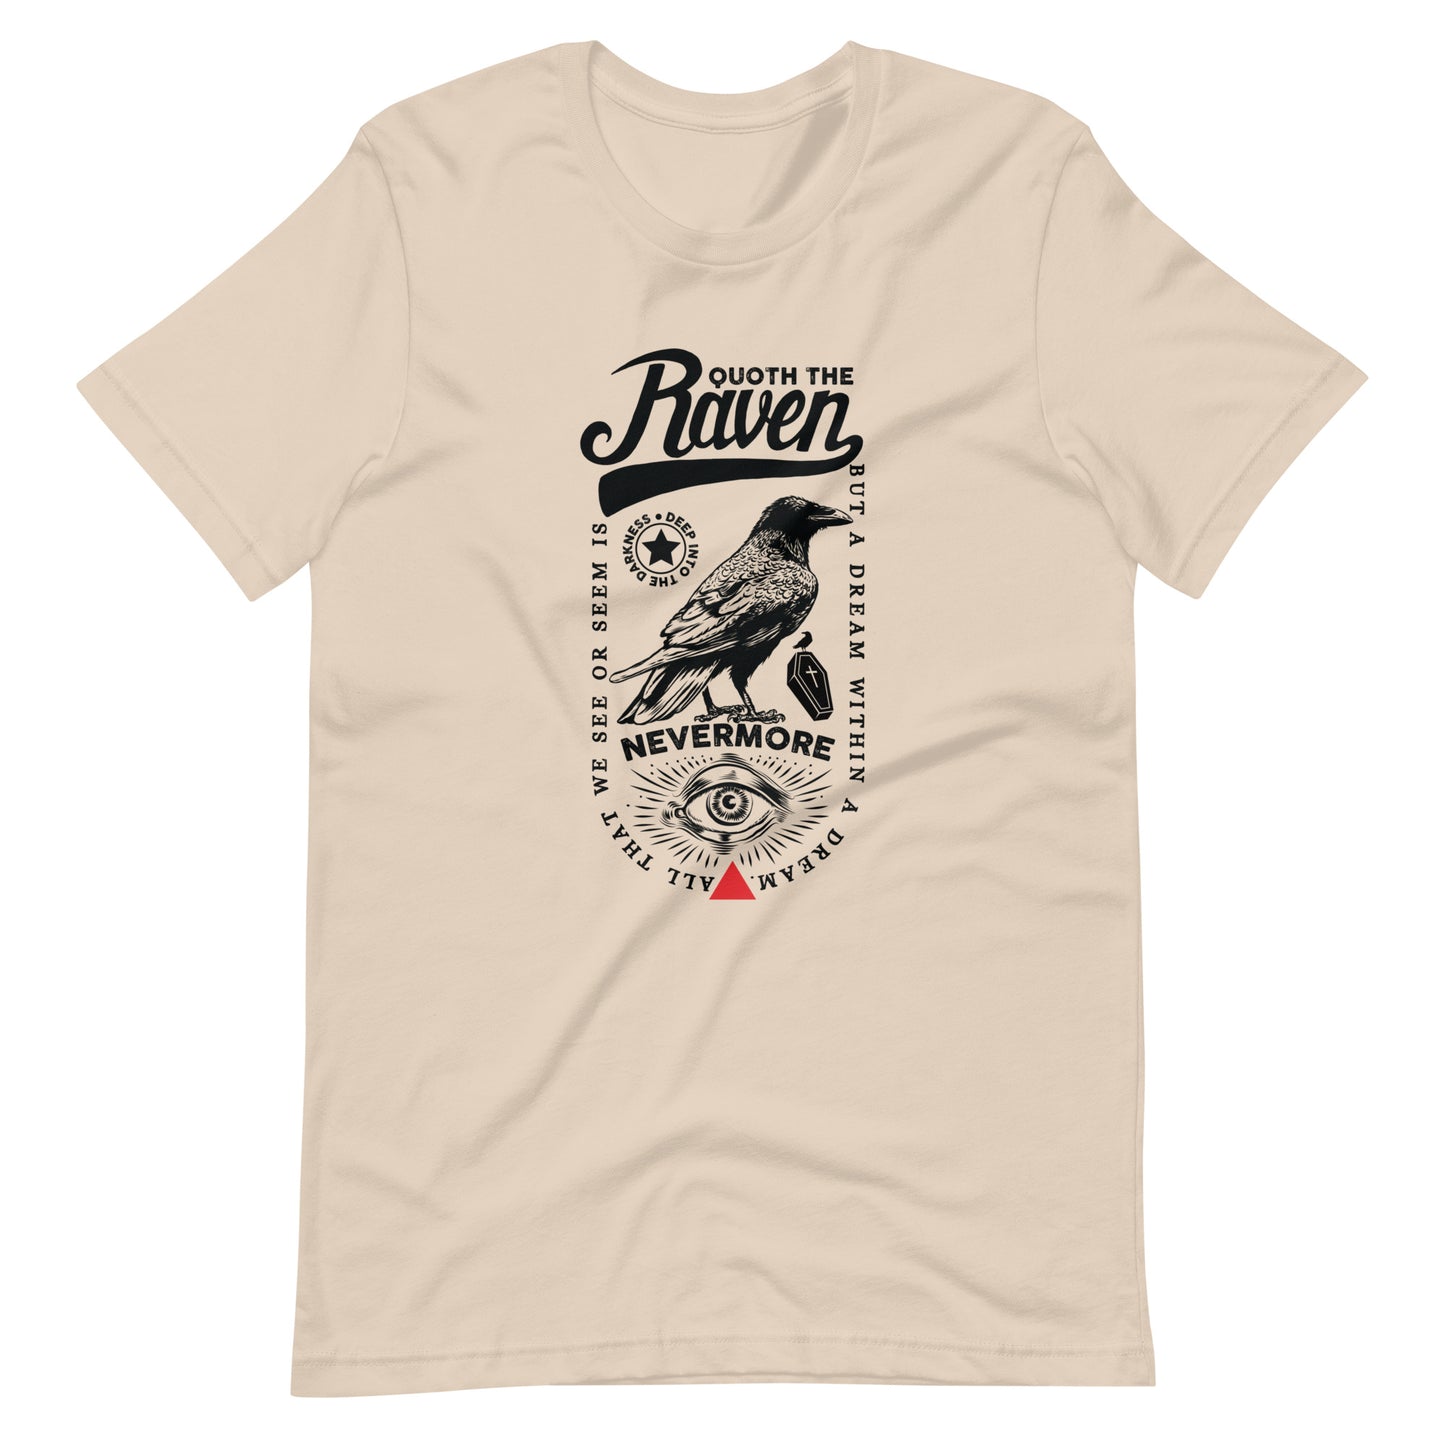 Quoth the Raven Nevermore Loaded - Men's t-shirt - Soft Cream Front